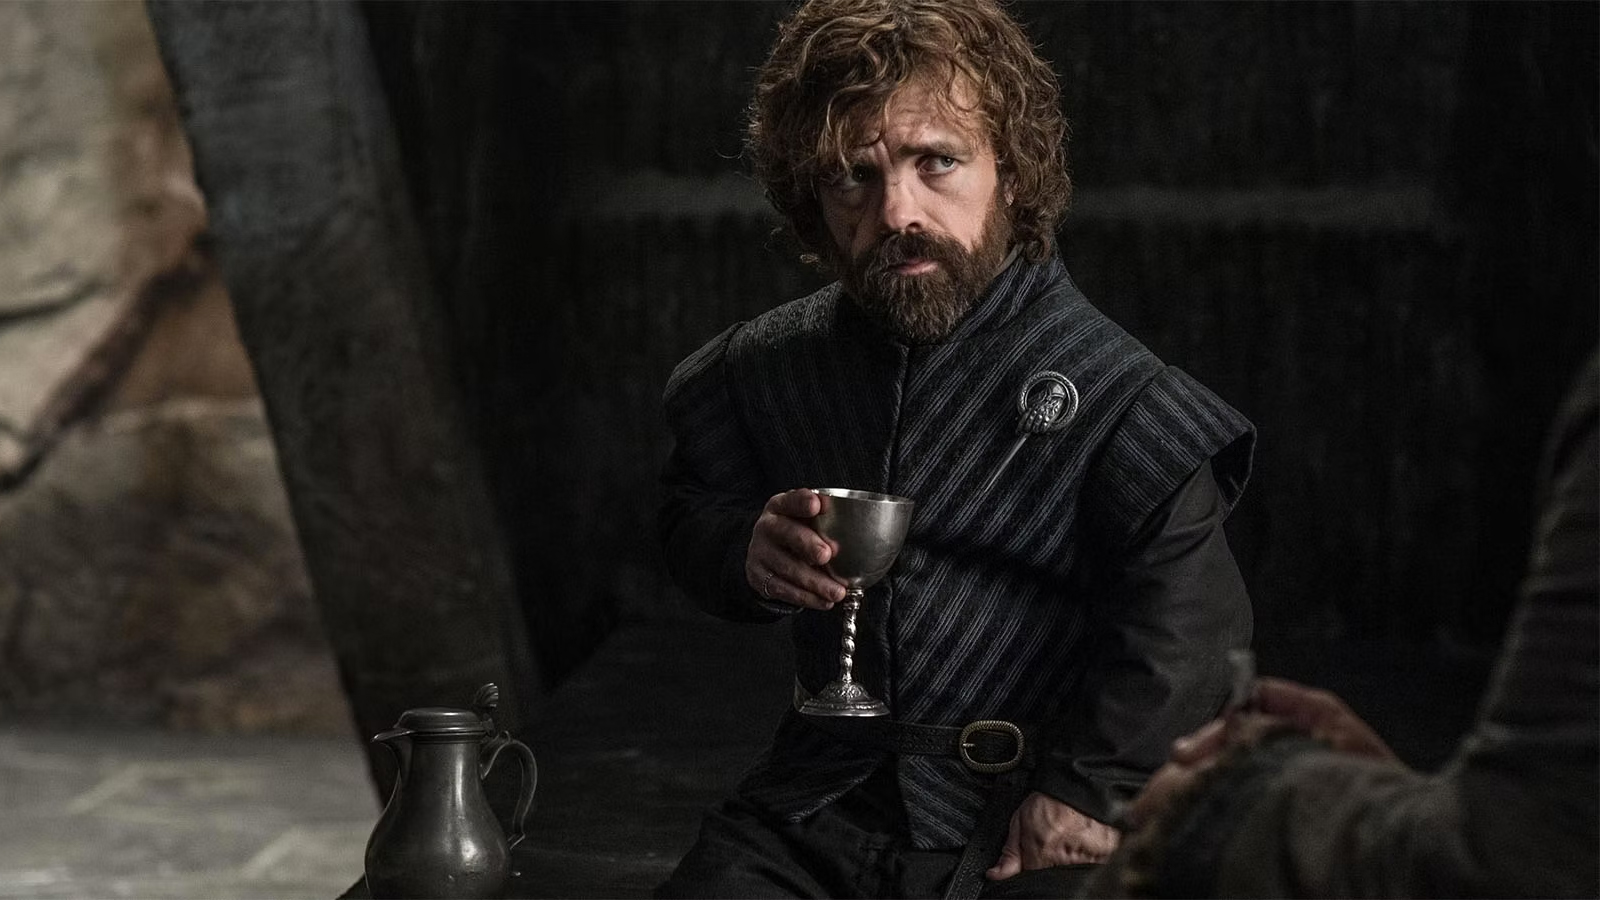 Tyrion Lannister's Wittiest Lines From ‘Game Of Thrones’